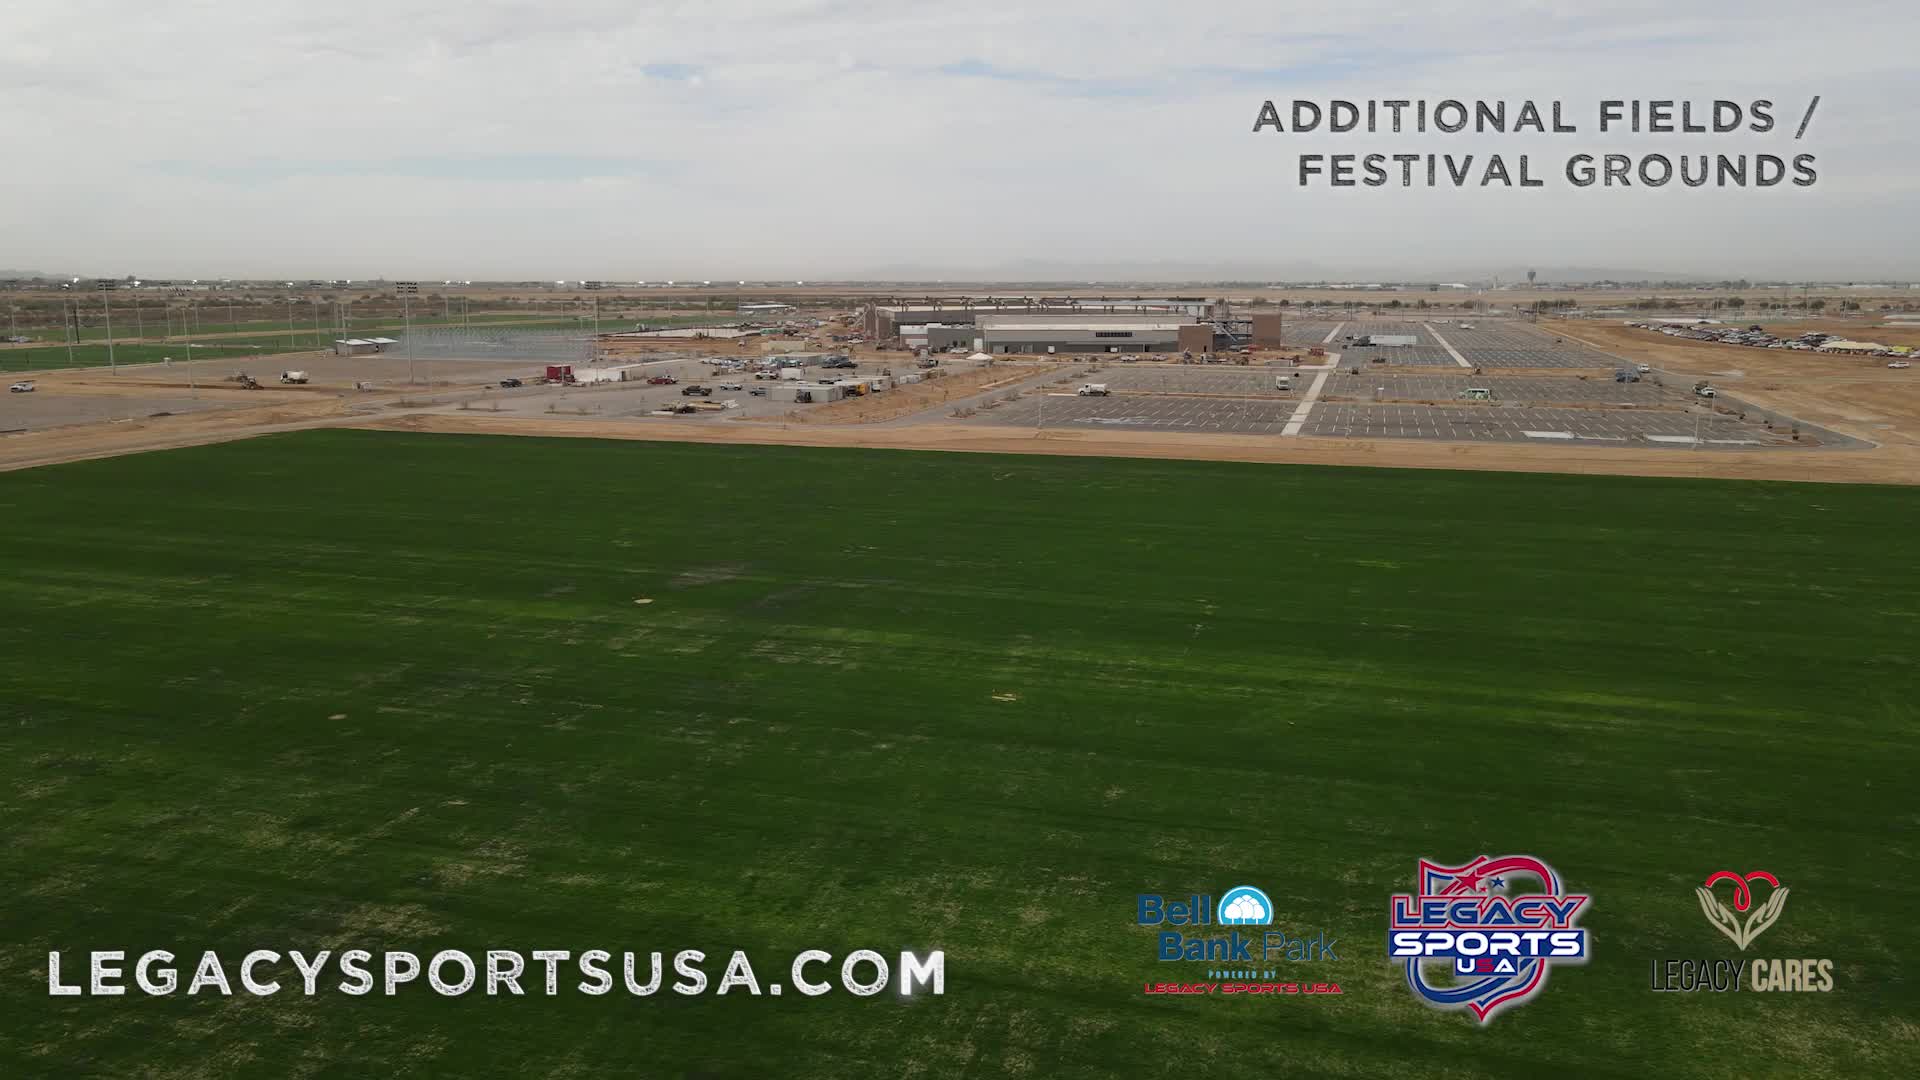 Drone footage: Bell Bank Park in Mesa set to open in January